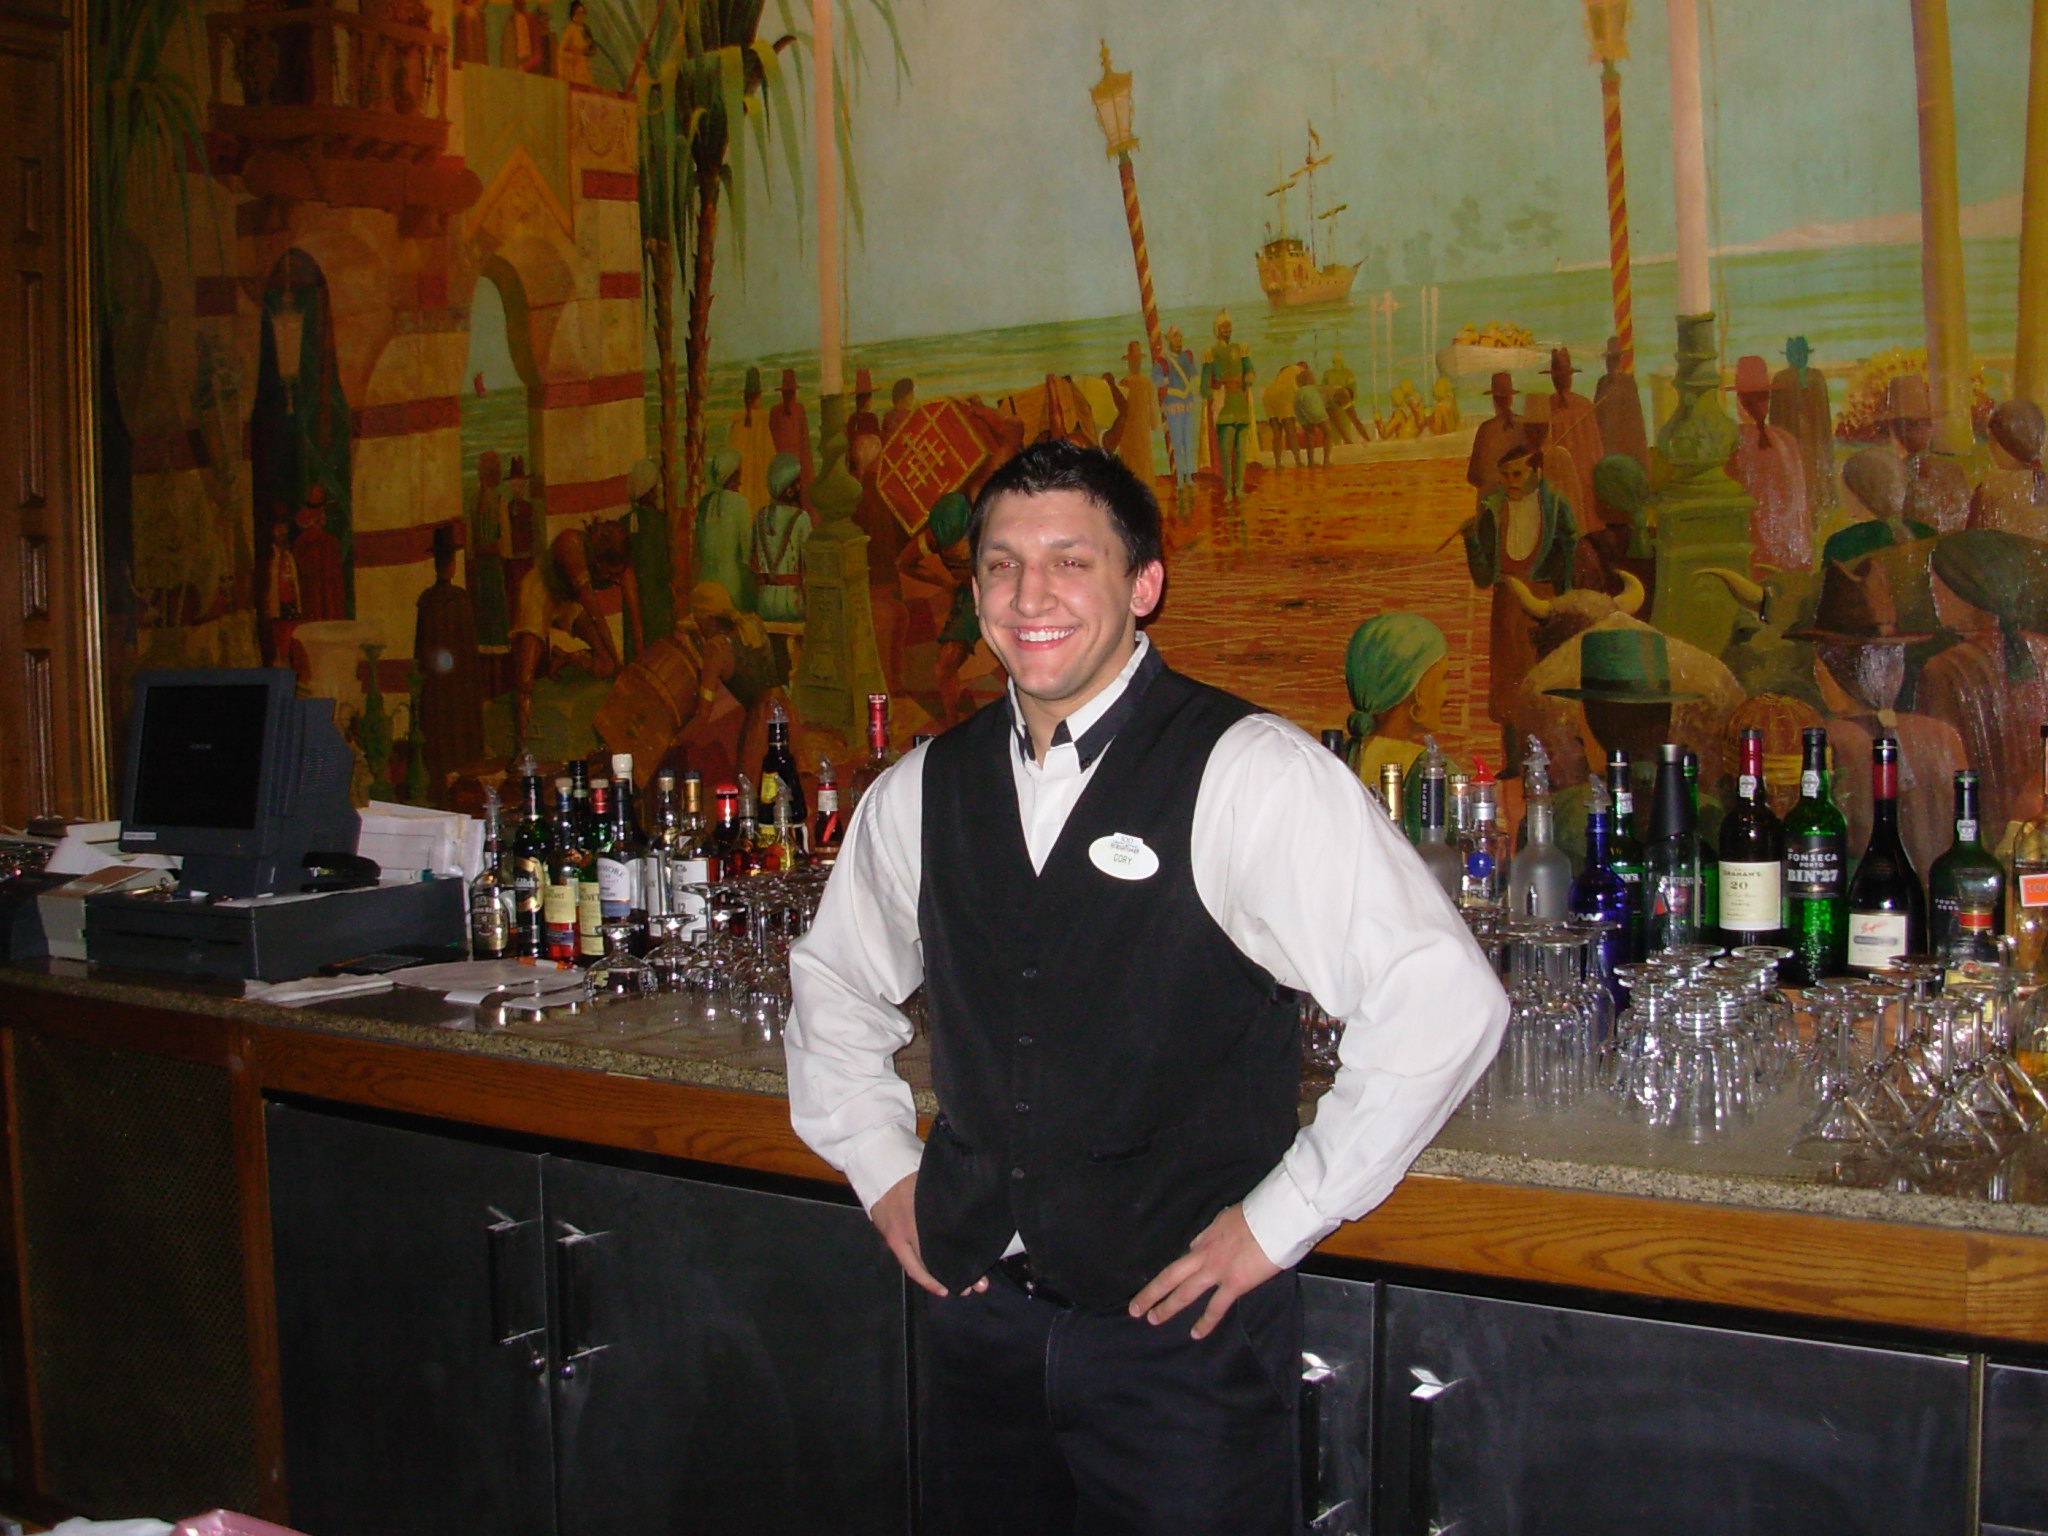 The Iberian Lounge at the Hotel Hershey has cute waiters for the girls...
